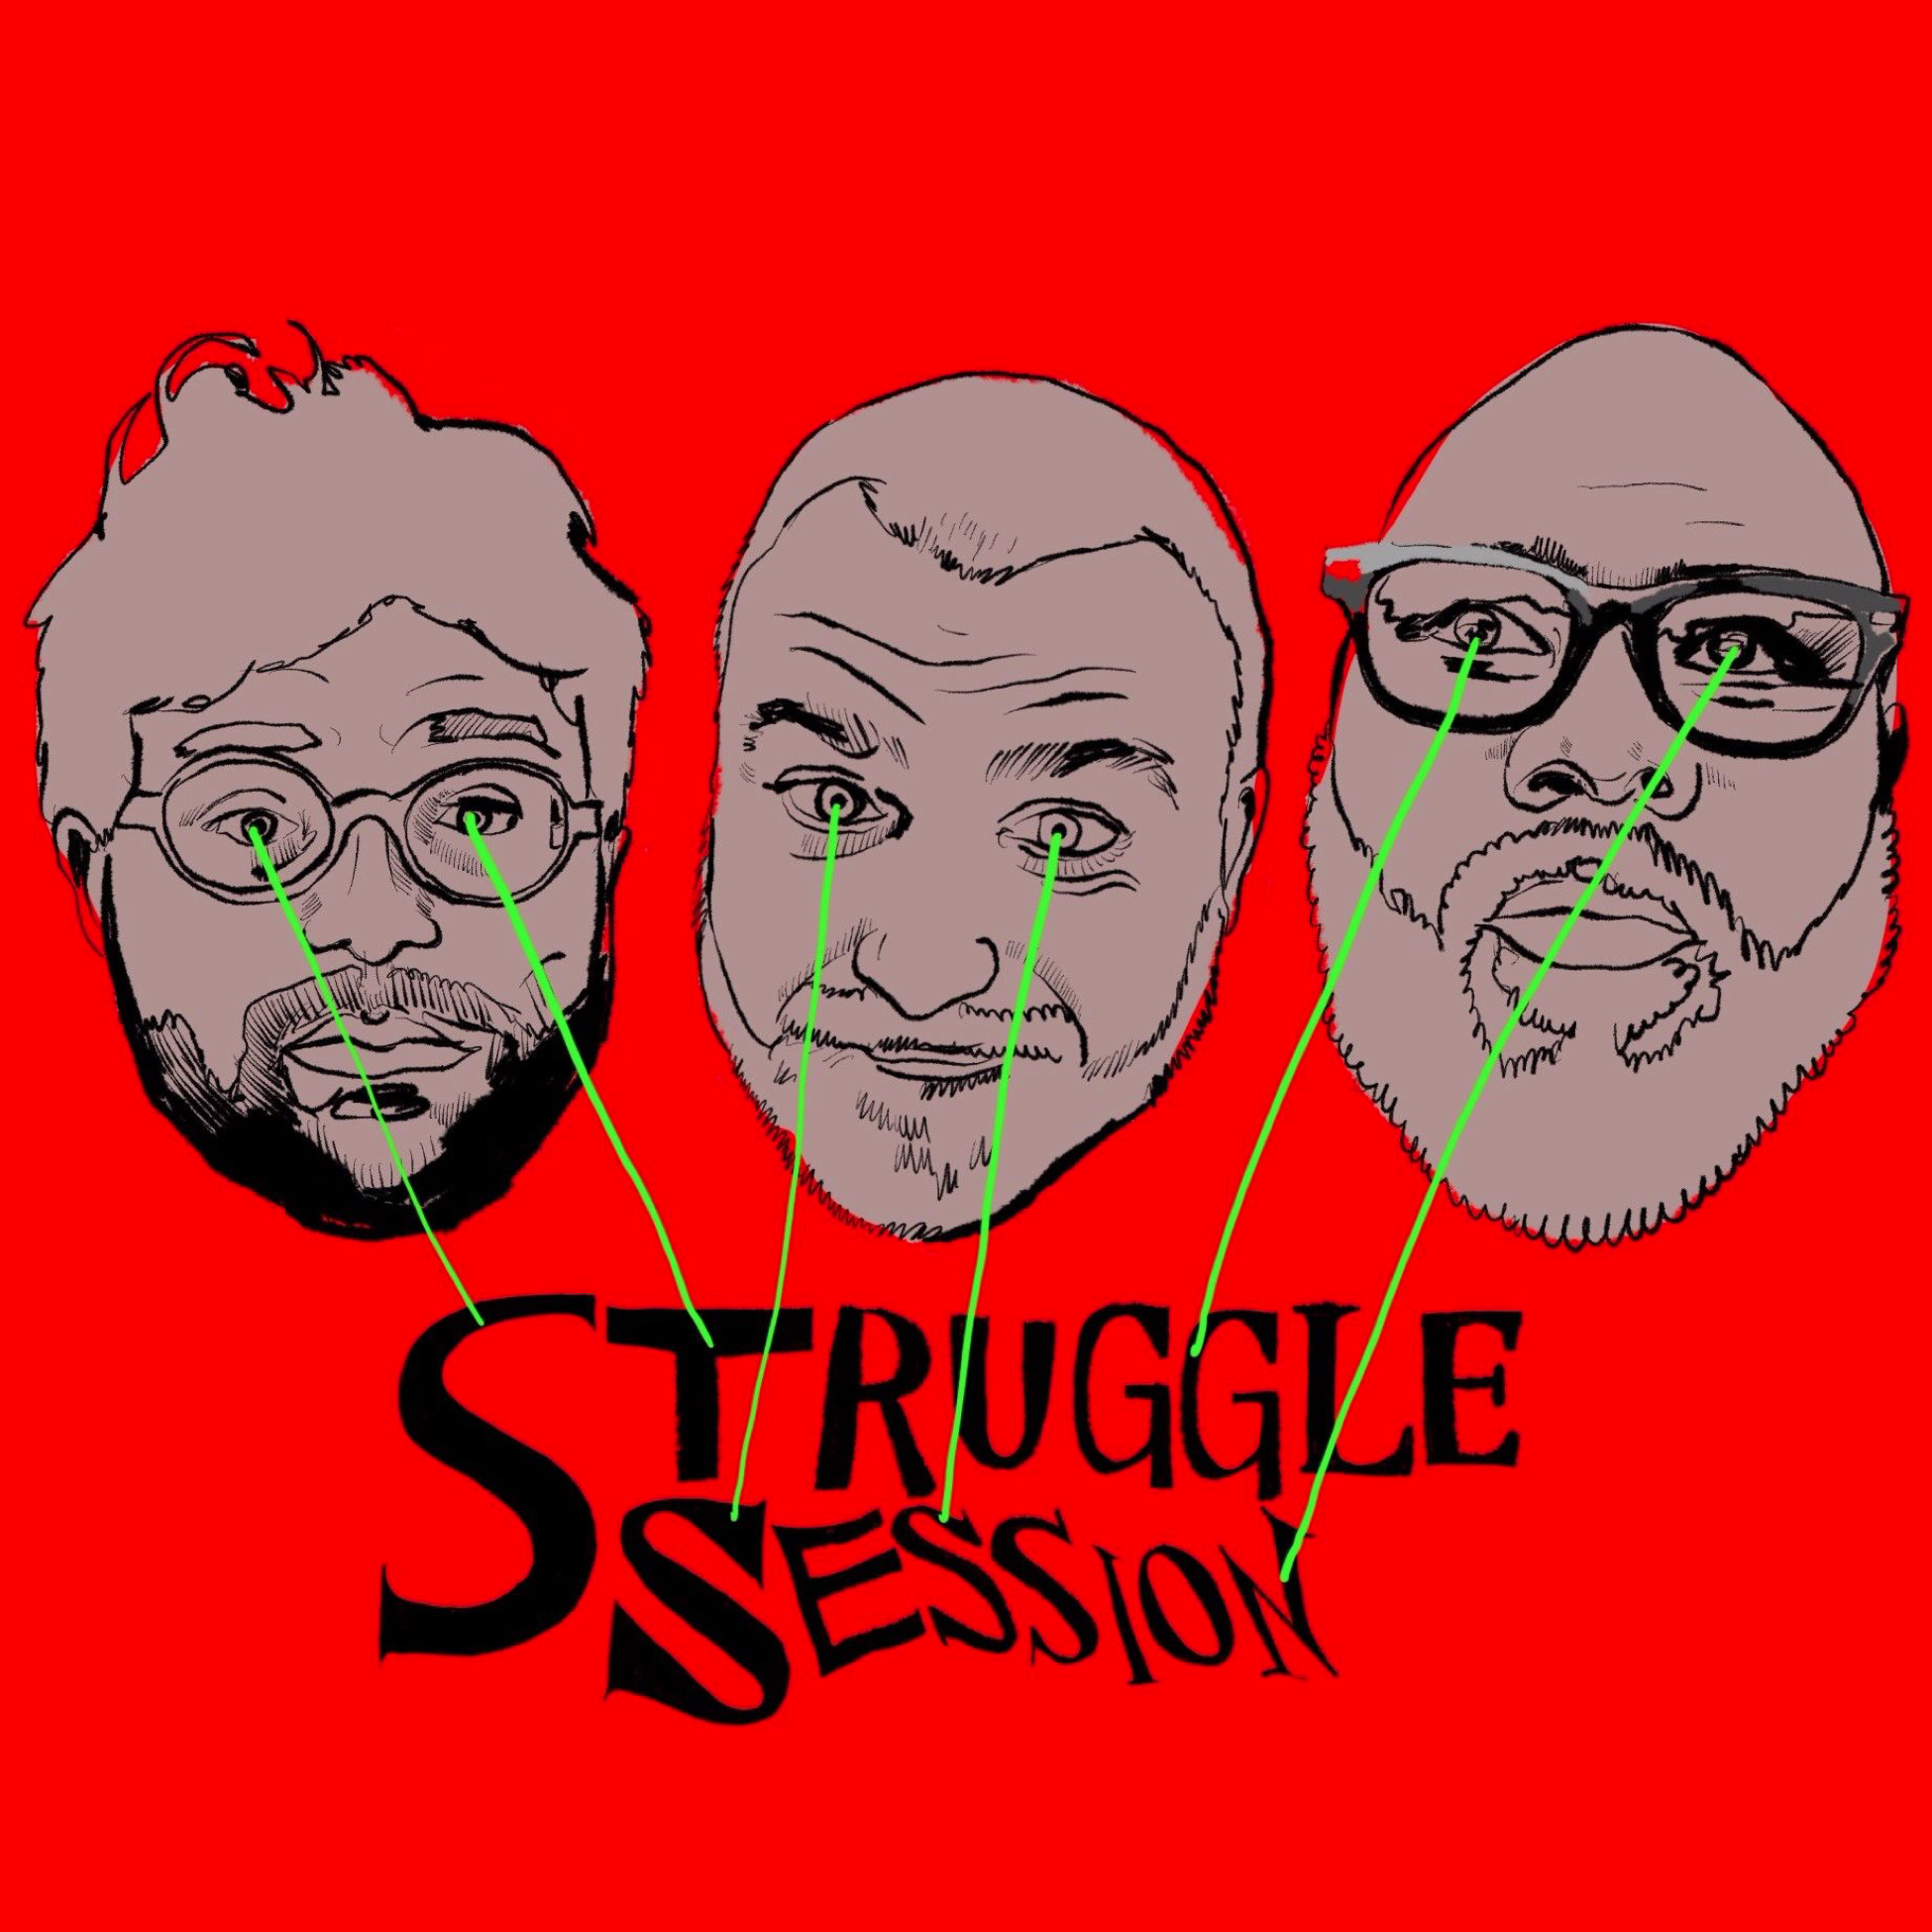 Podcast of the Week Struggle Session